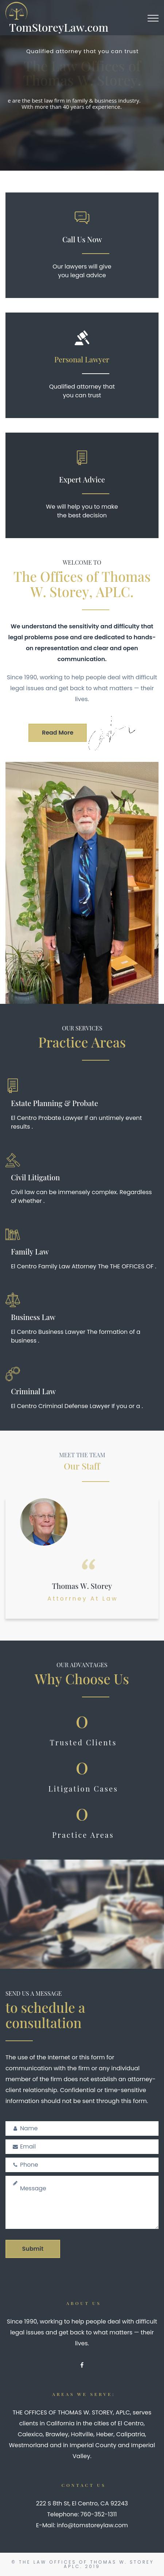 THE OFFICES OF THOMAS W. STOREY, APLC - El Centro CA Lawyers